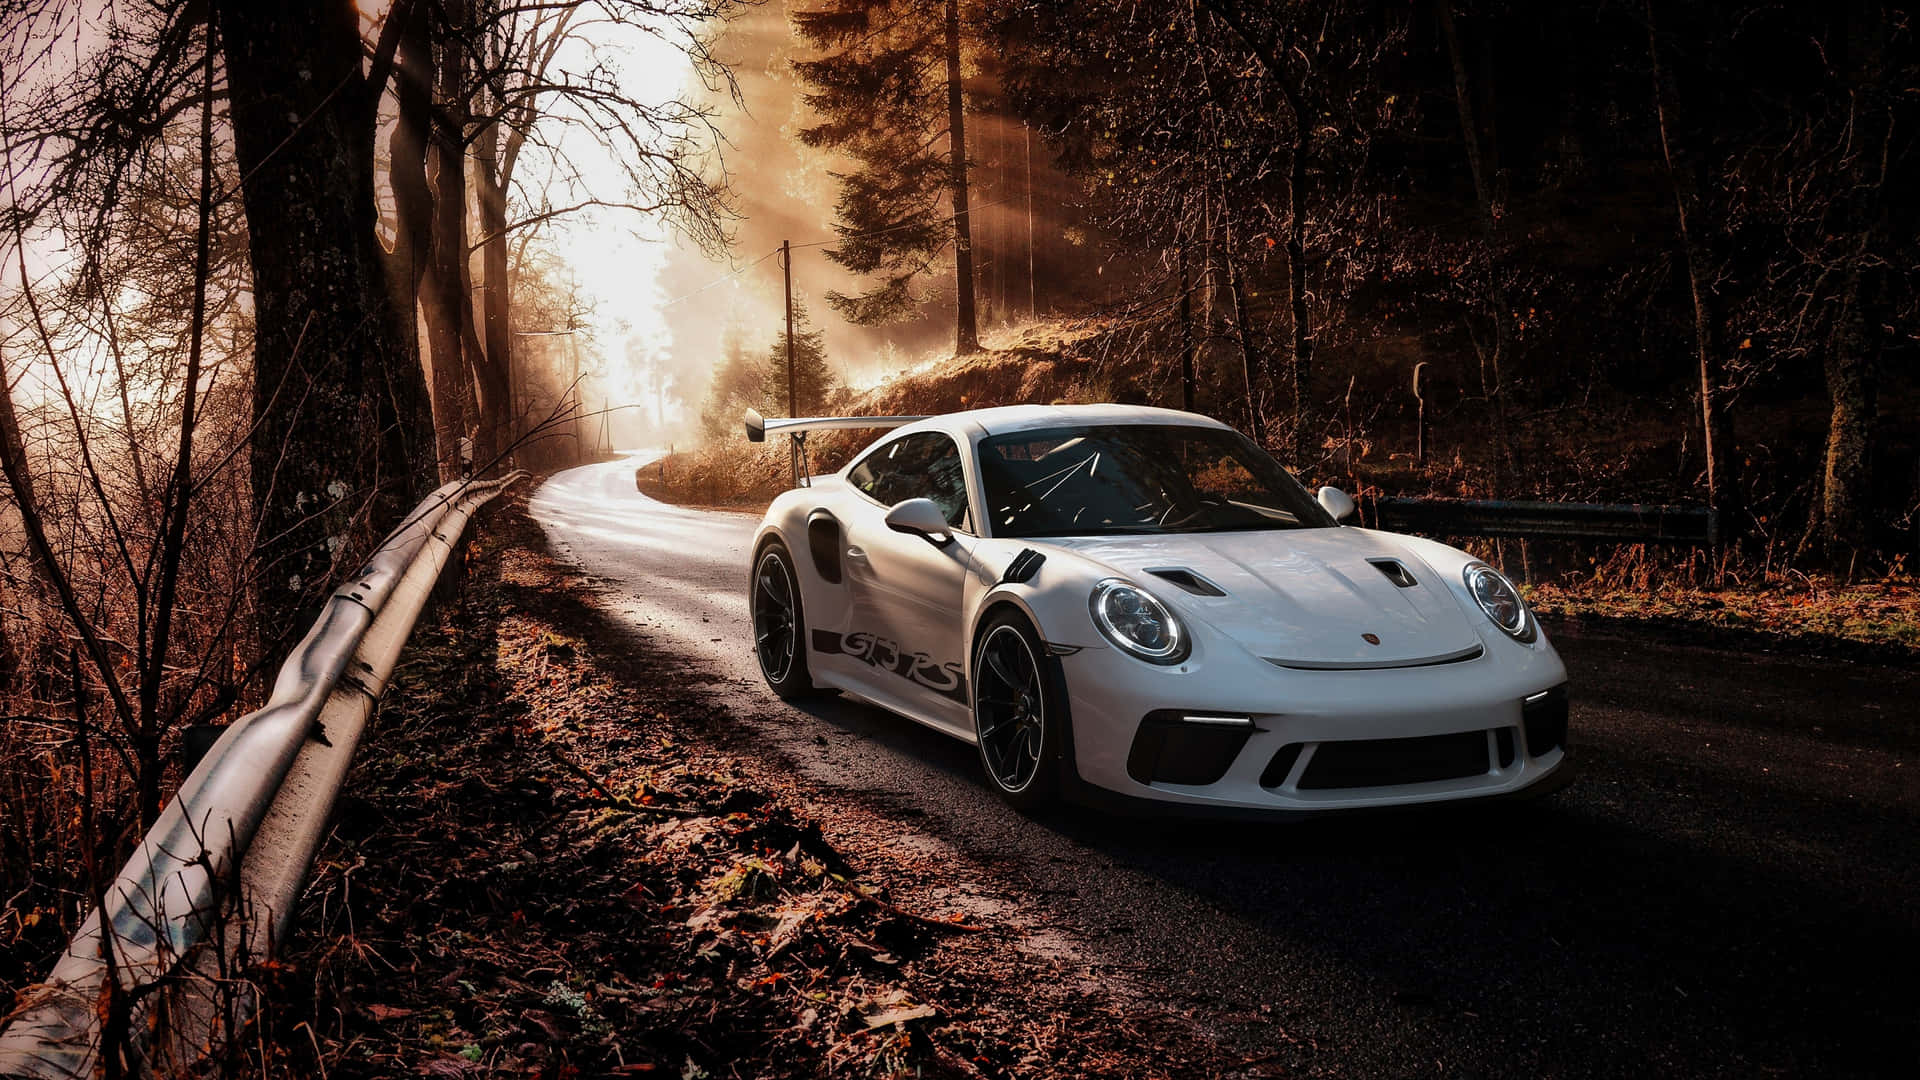 Experience The Power Of Driving A 4k Ultra Hd Porsche. Background